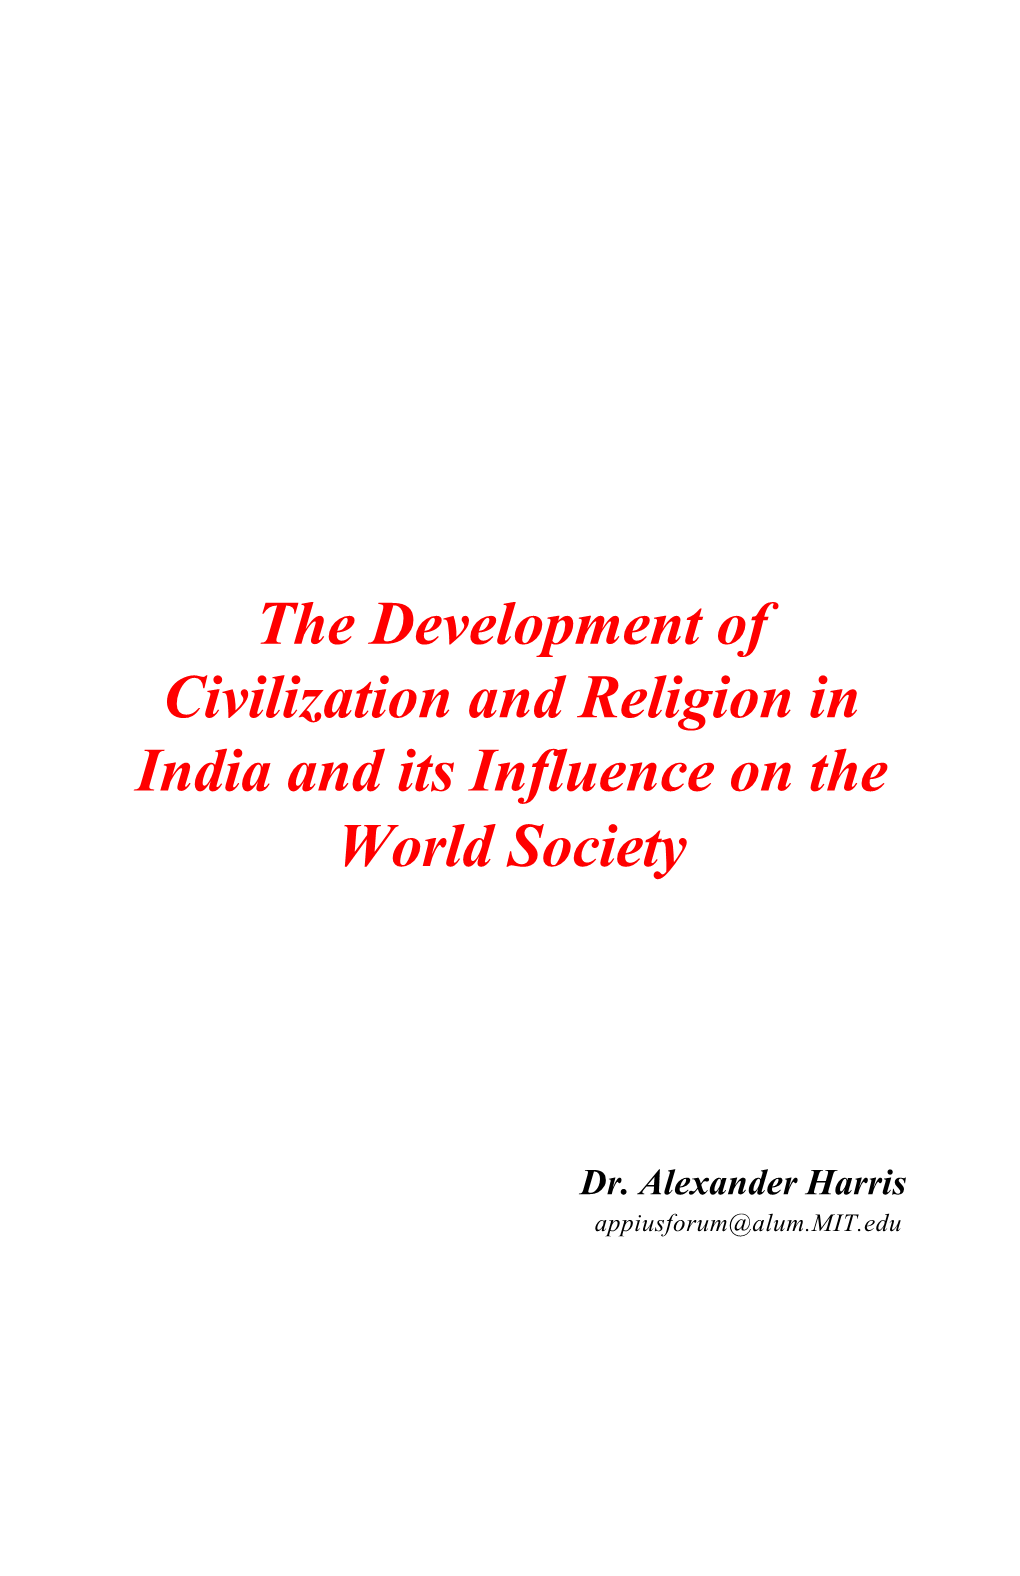 The Development of Civilization and Religion in India & Impact on The